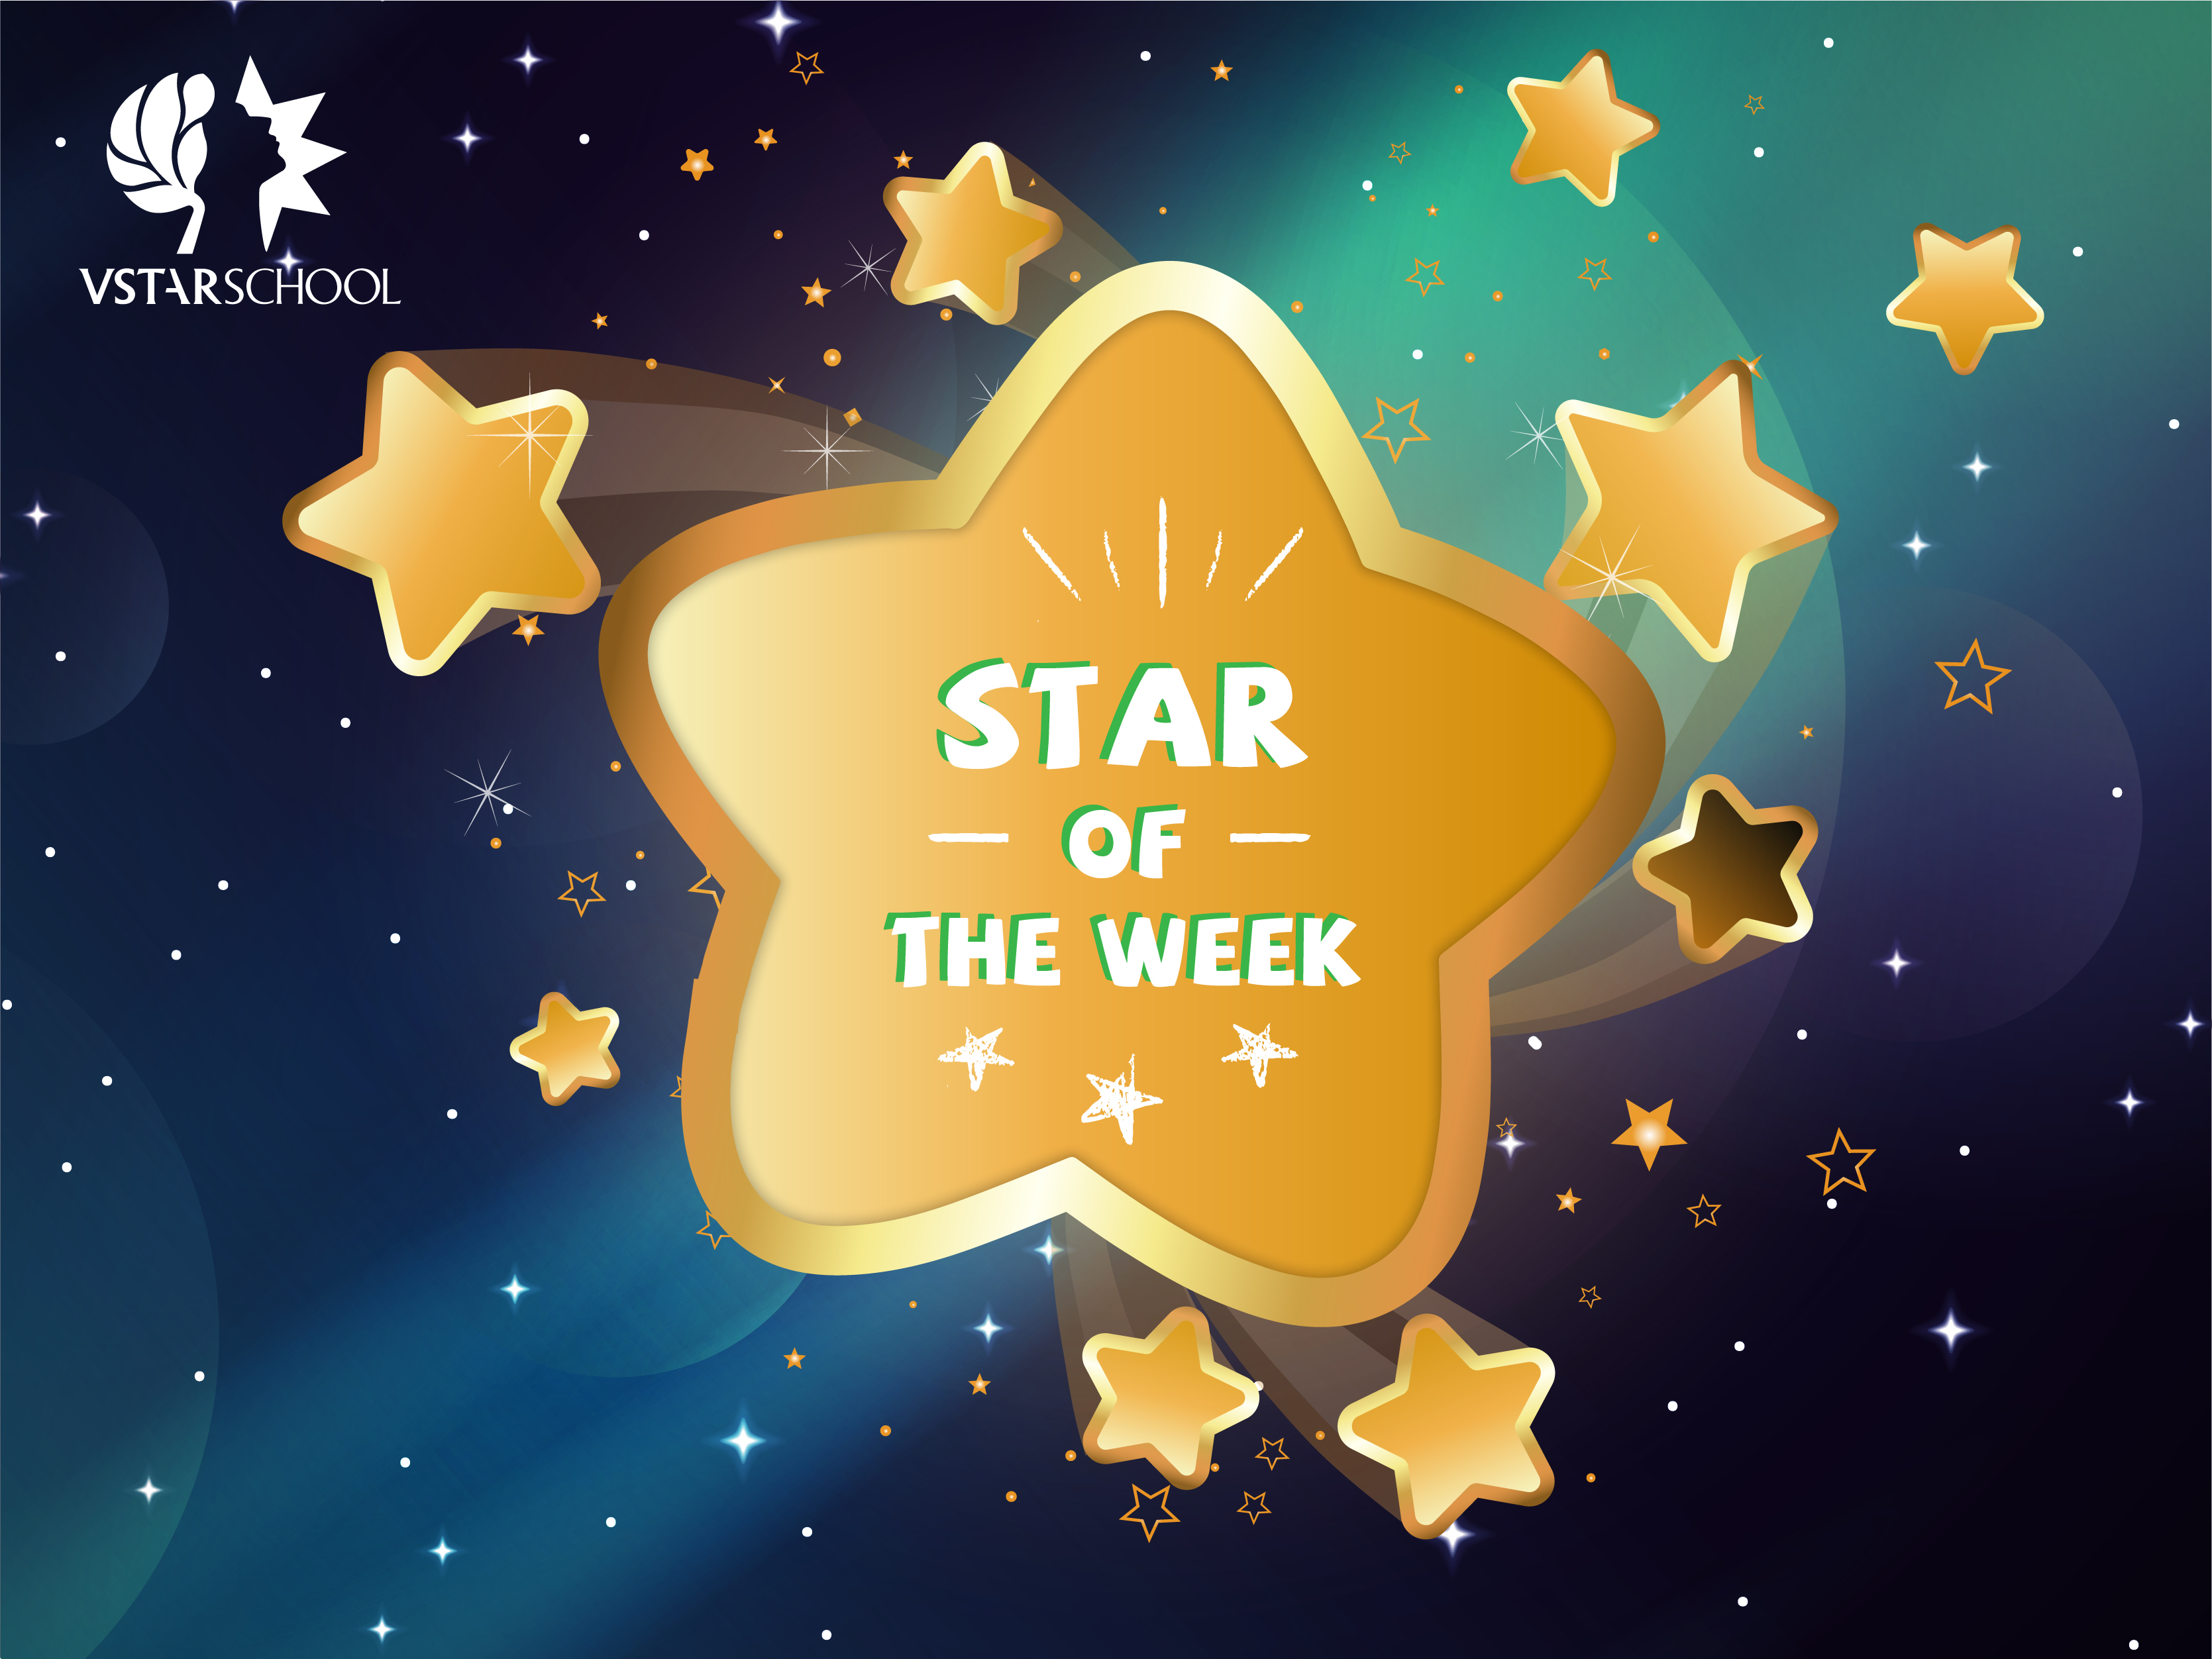 STAR OF THE WEEK TUẦN 3 - 06/2020